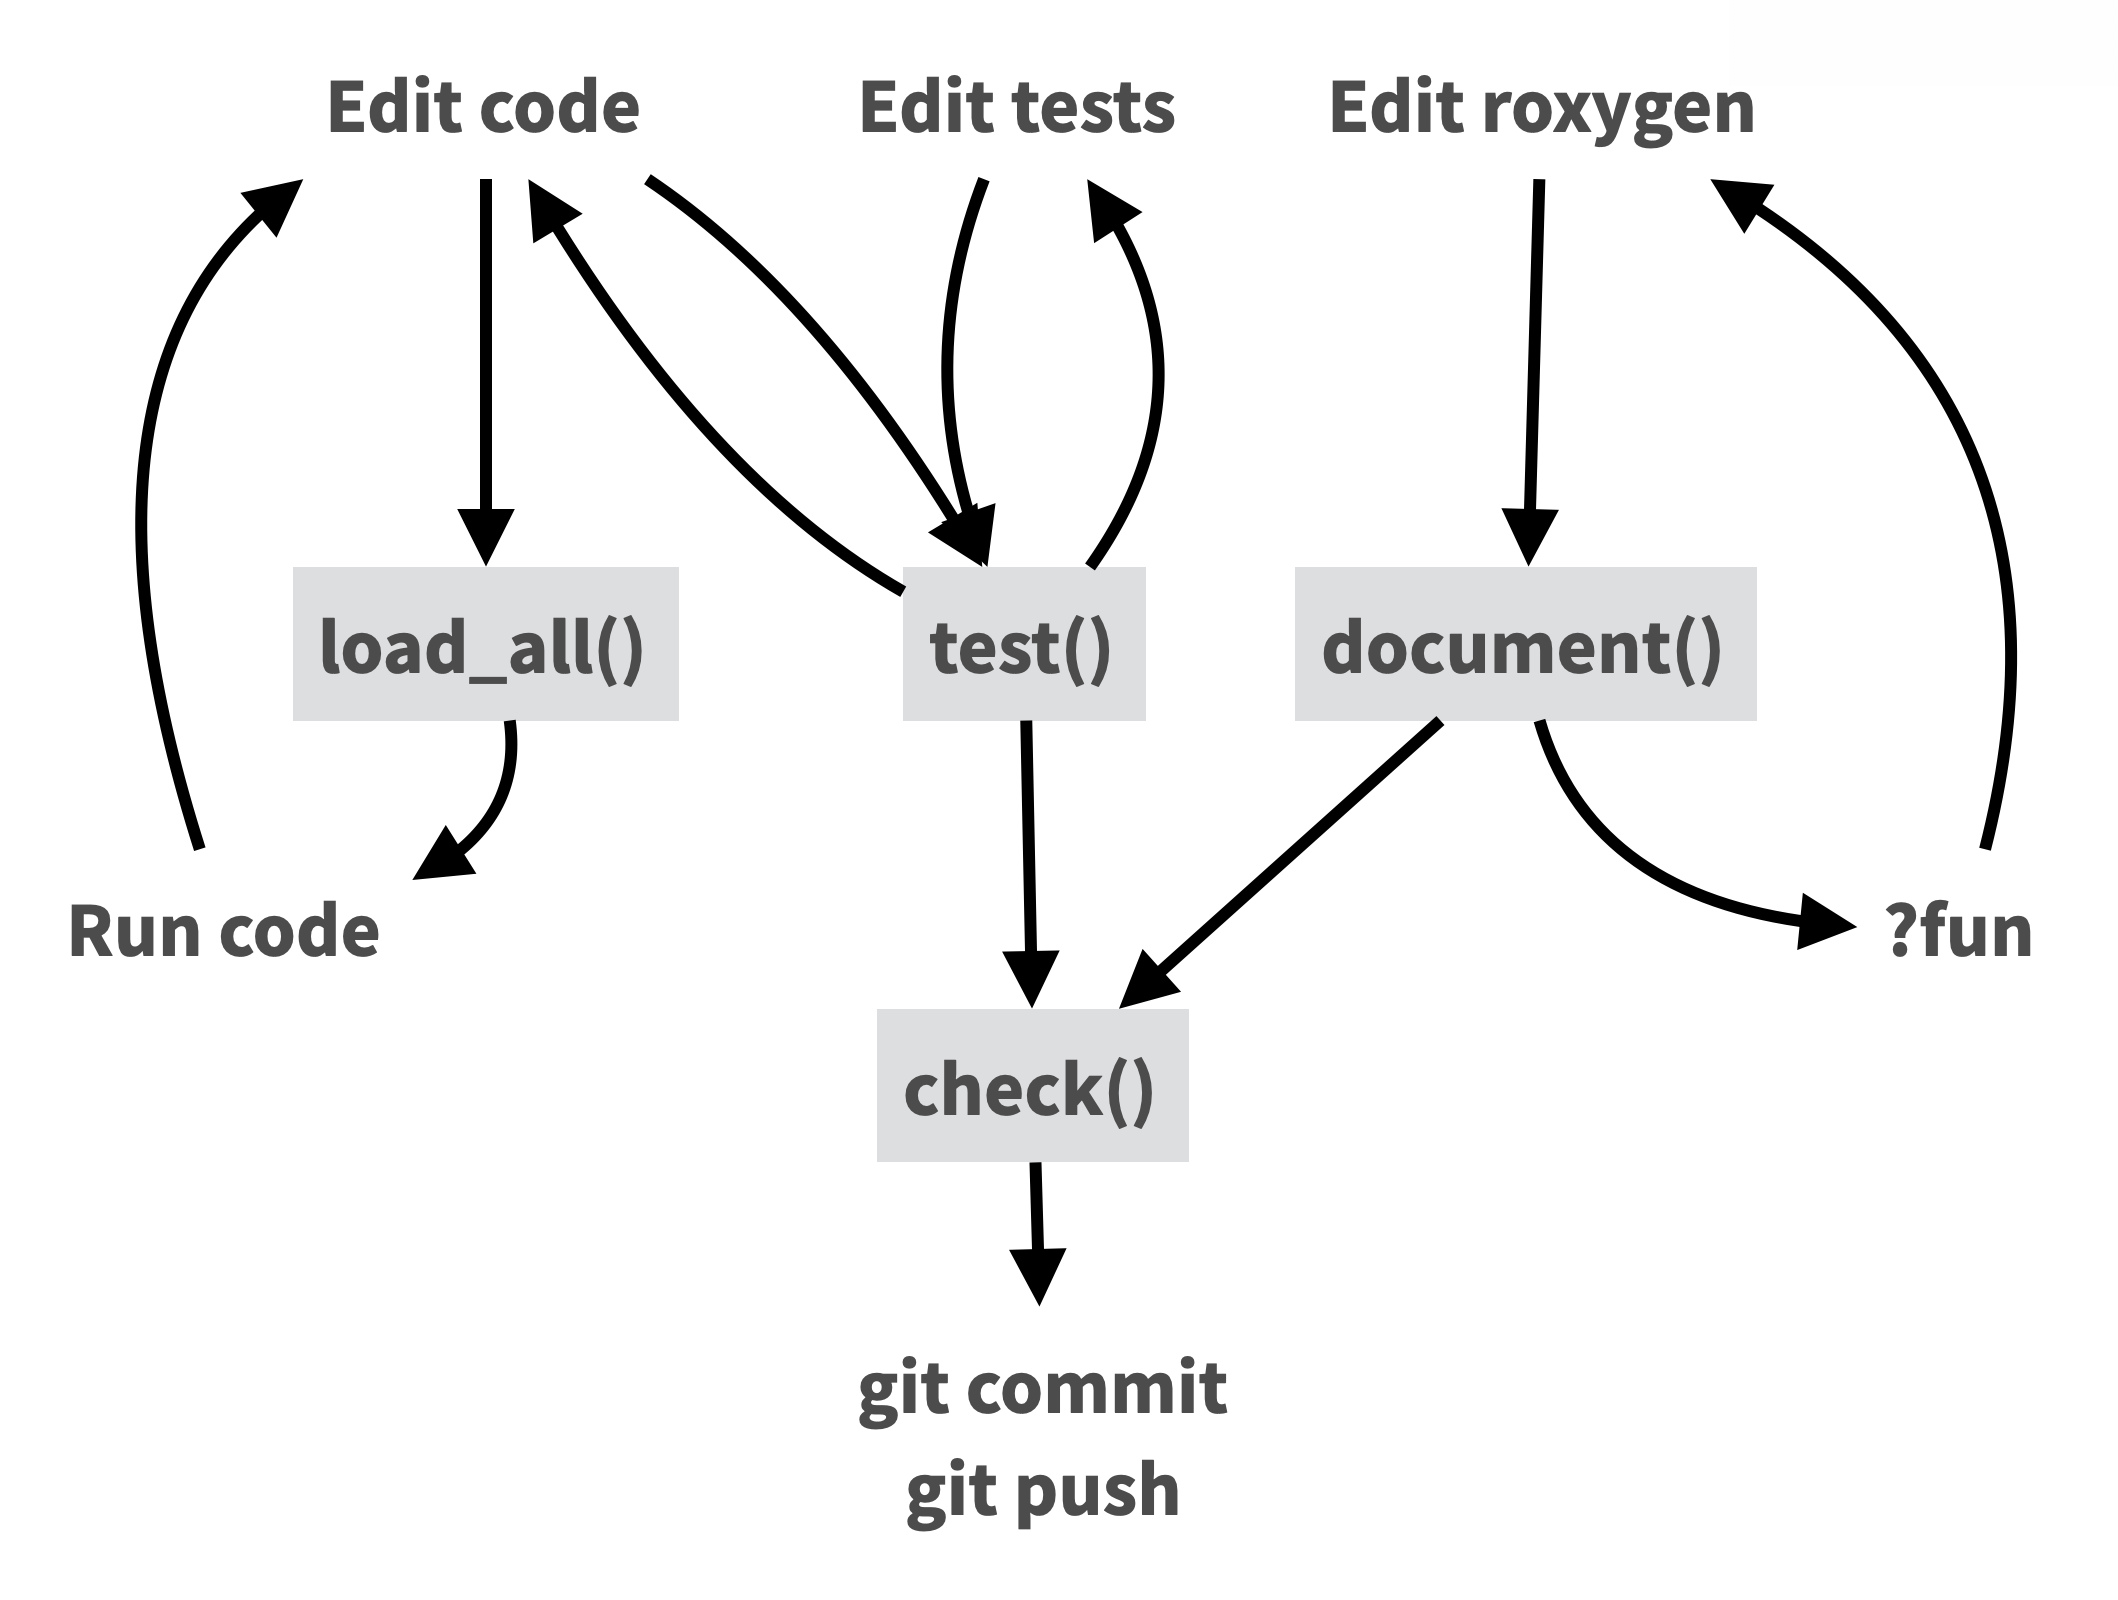 A flow chart describing a typical workflow of editing code, testing code, 
writing documentation, and checking your package.